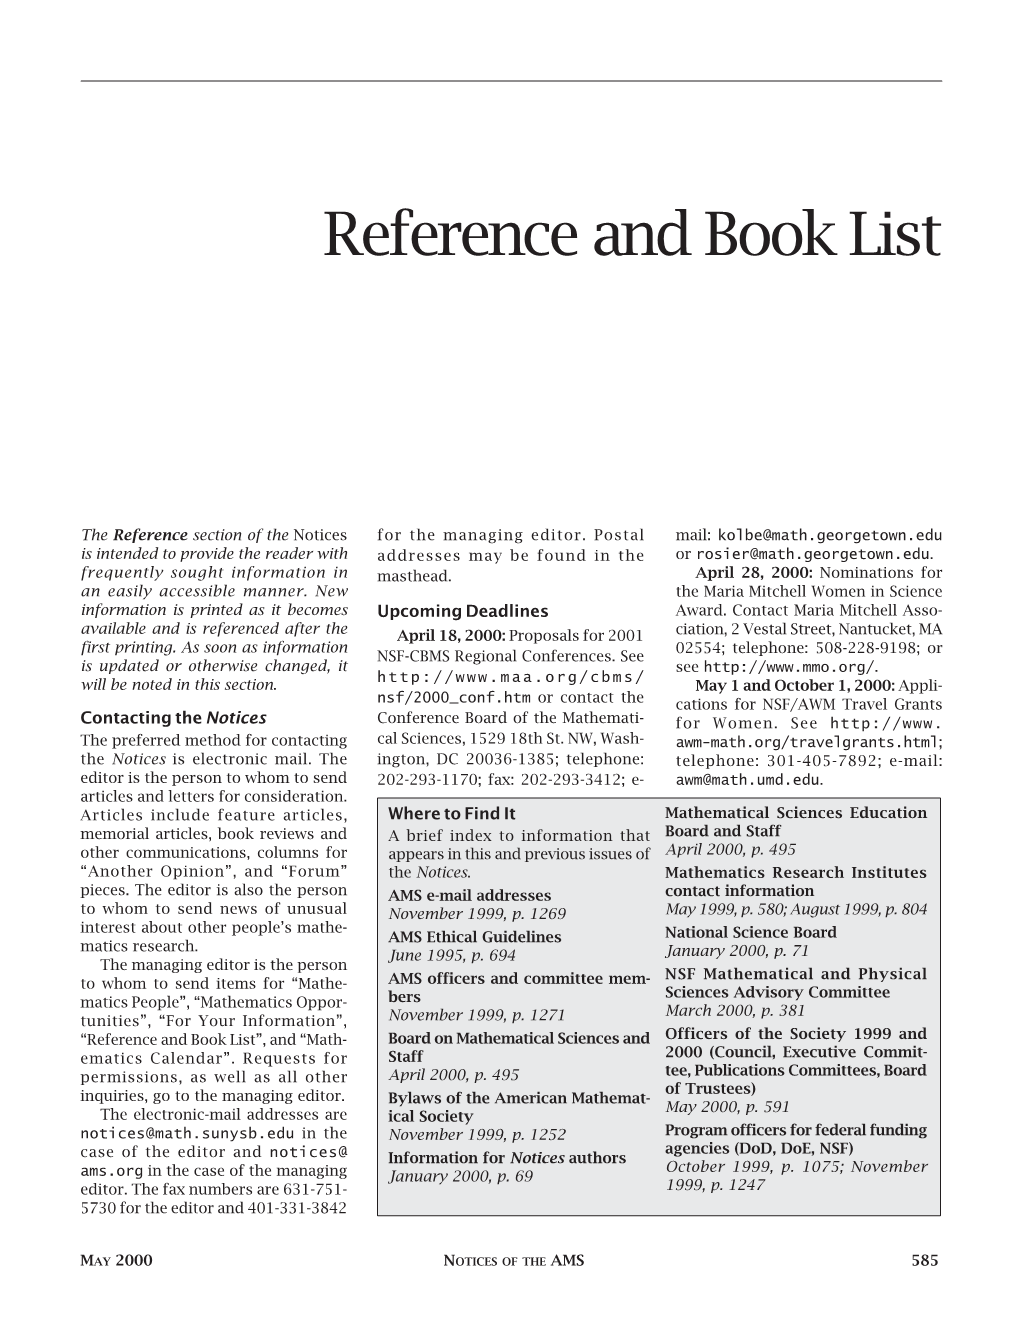 Reference and Book List, Volume 47